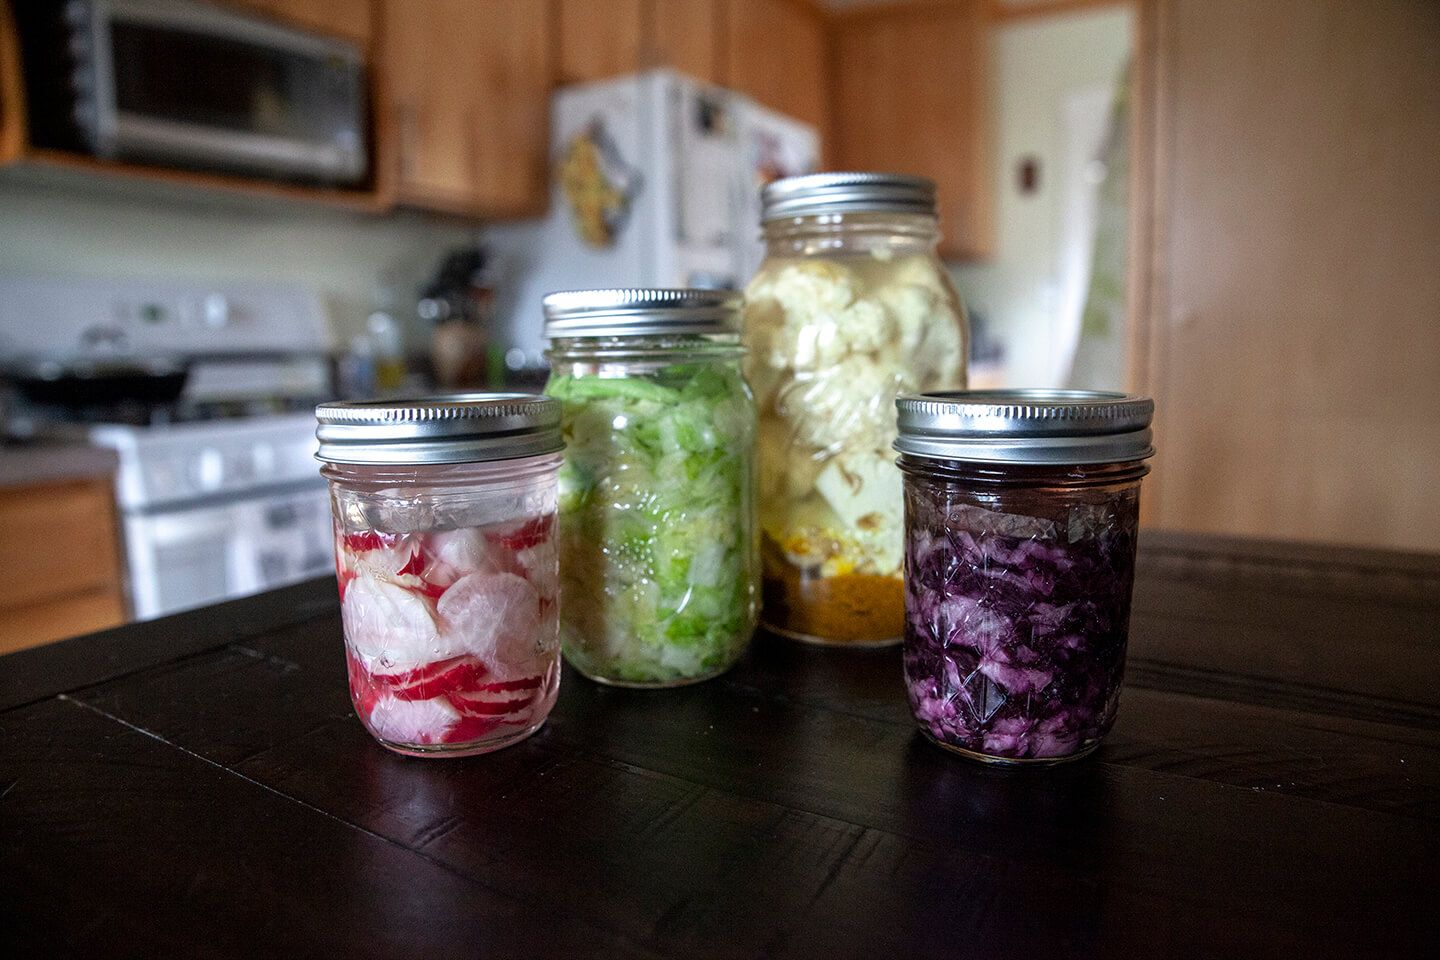 Four sealed, glass jars holding a variety of fermented vegetables.